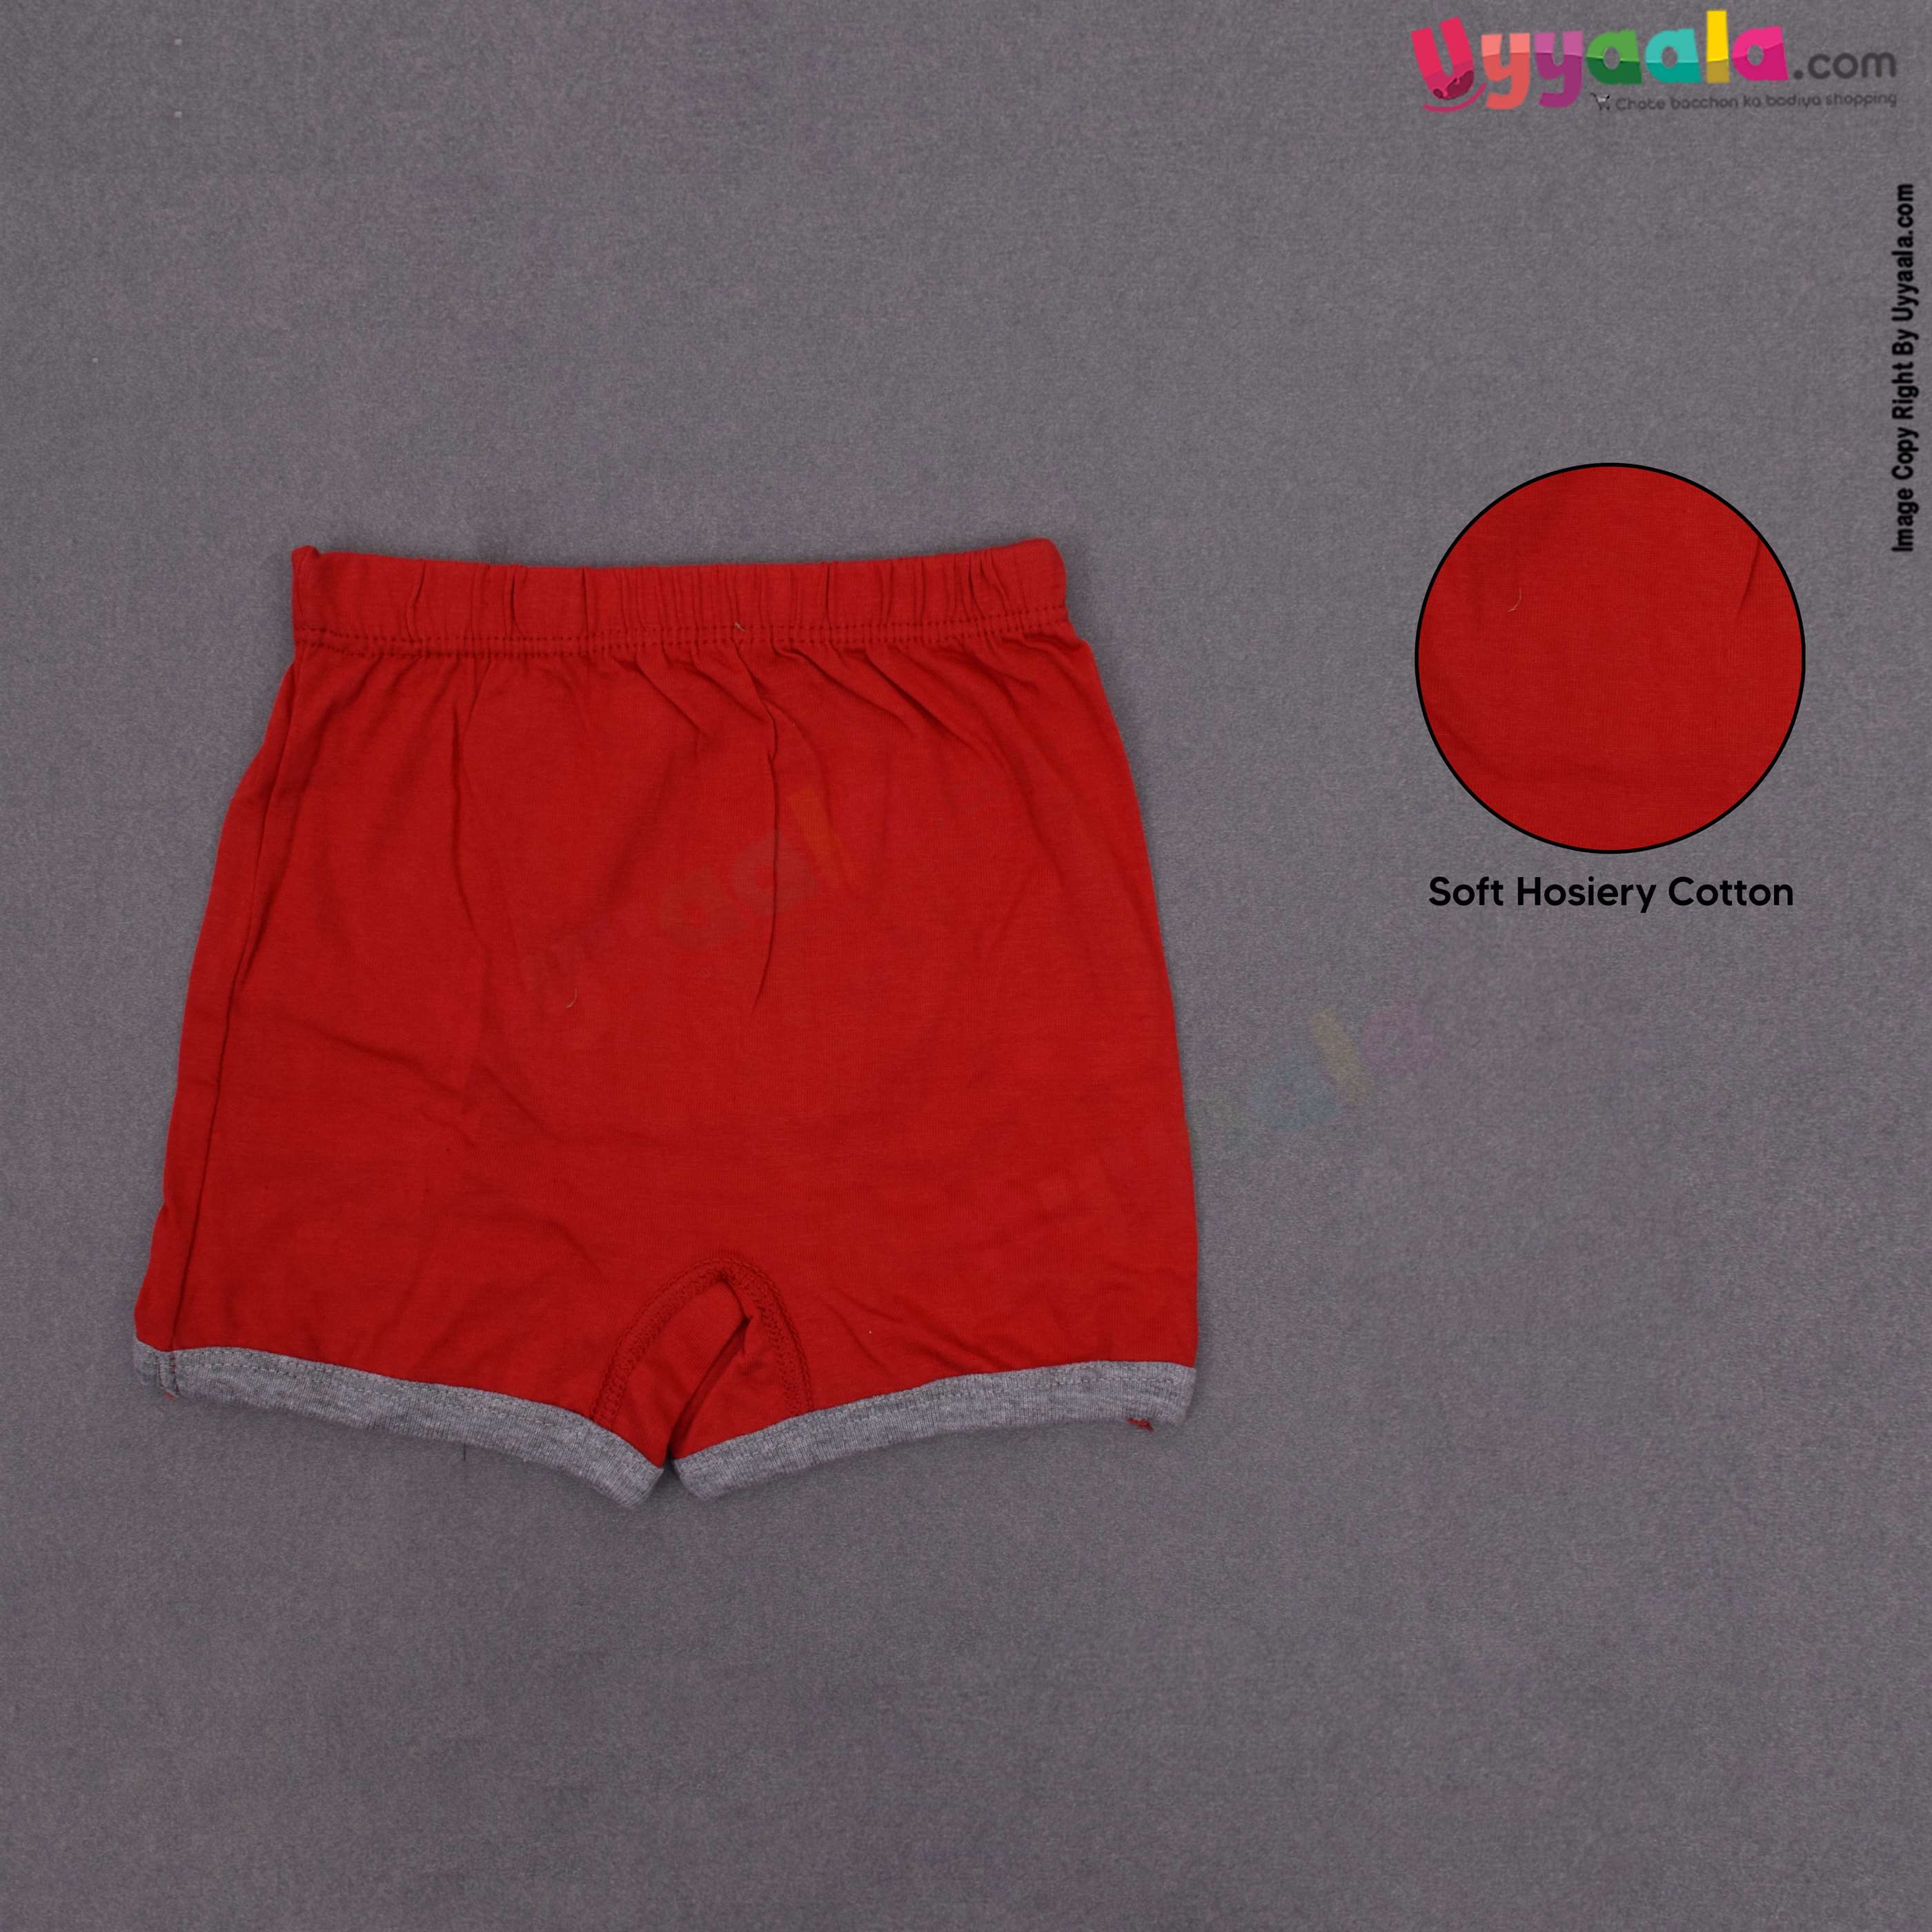 Cotton trunks, for kids